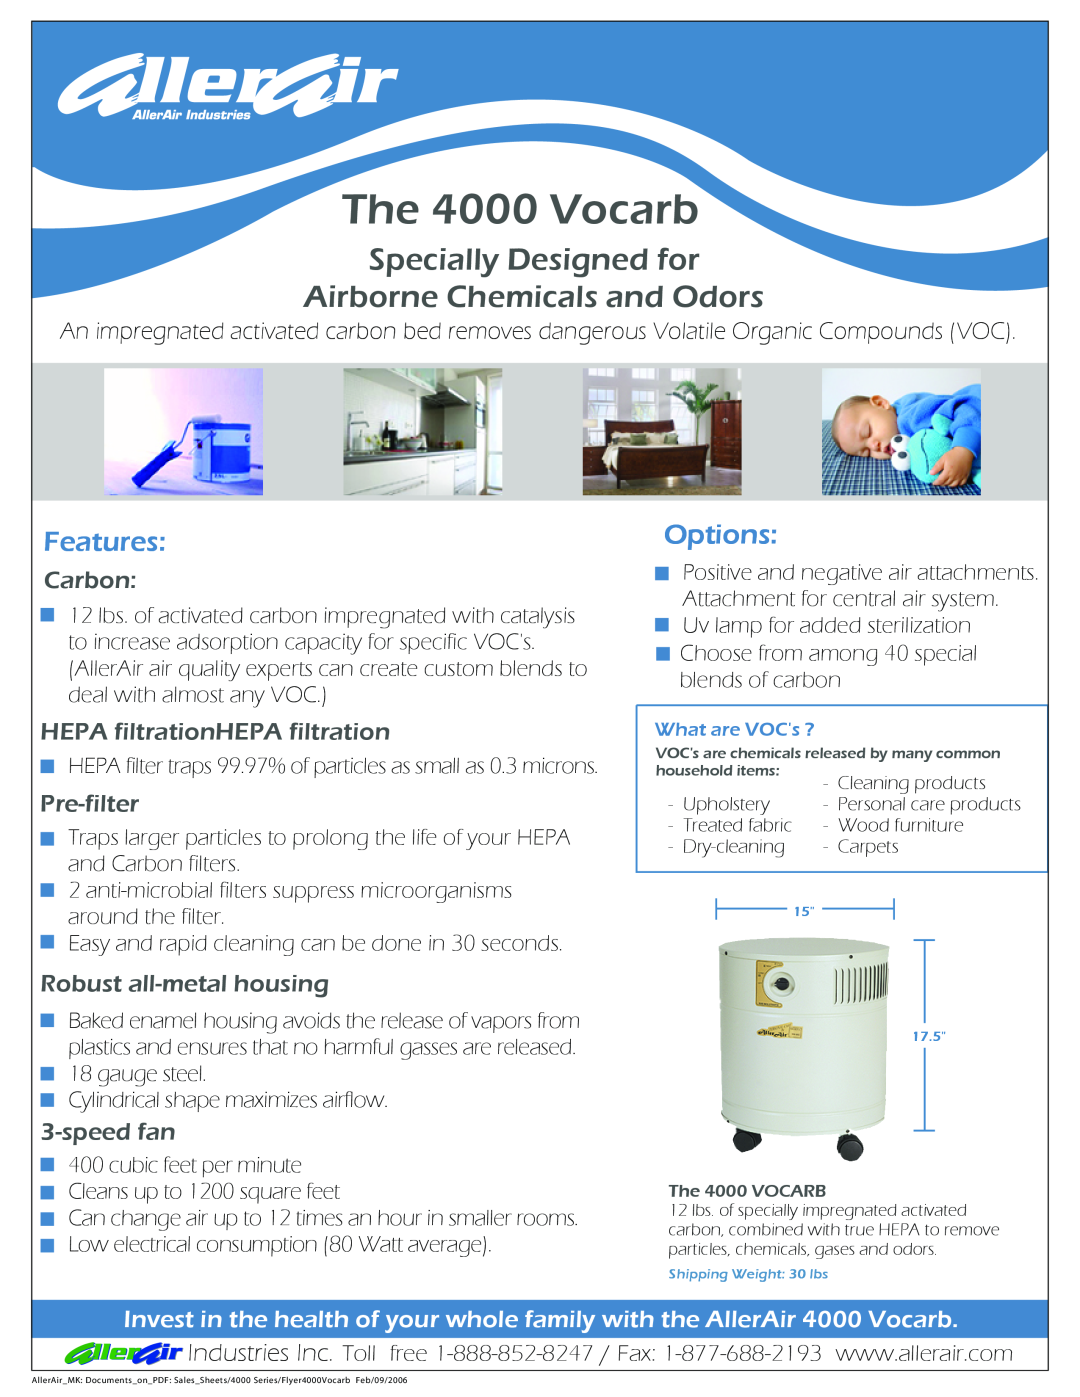 AllerAir 4000 Vocarb manual Specially Designed for Airborne Chemicals and Odors, Carbon, HEPA filtrationHEPA filtration 